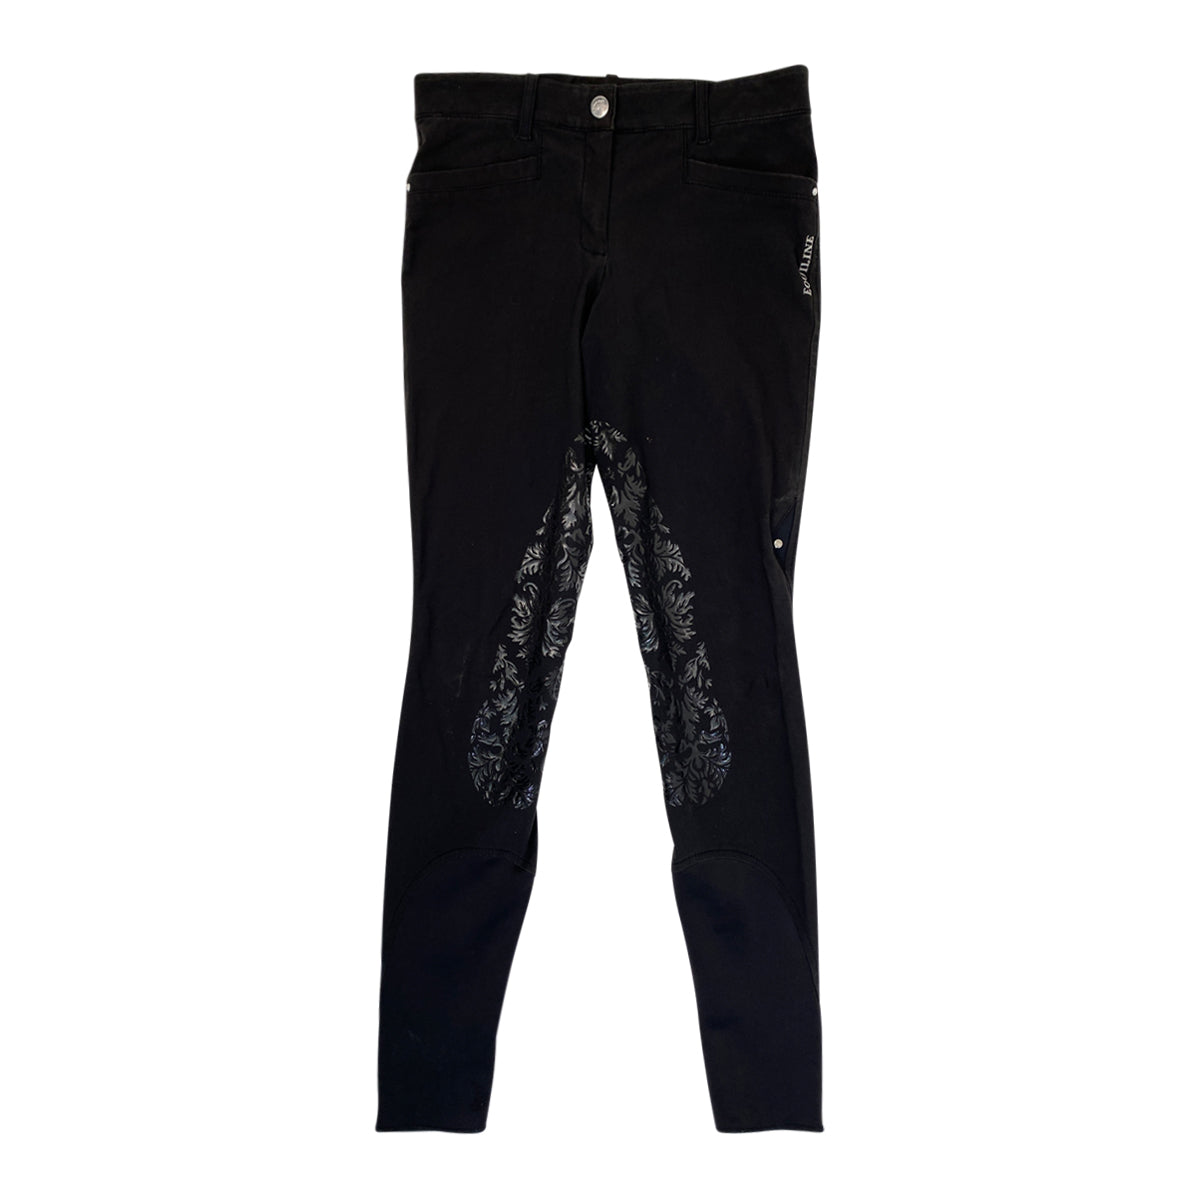 Equiline &#39;G-Zone&#39; Breeches in Black Florals